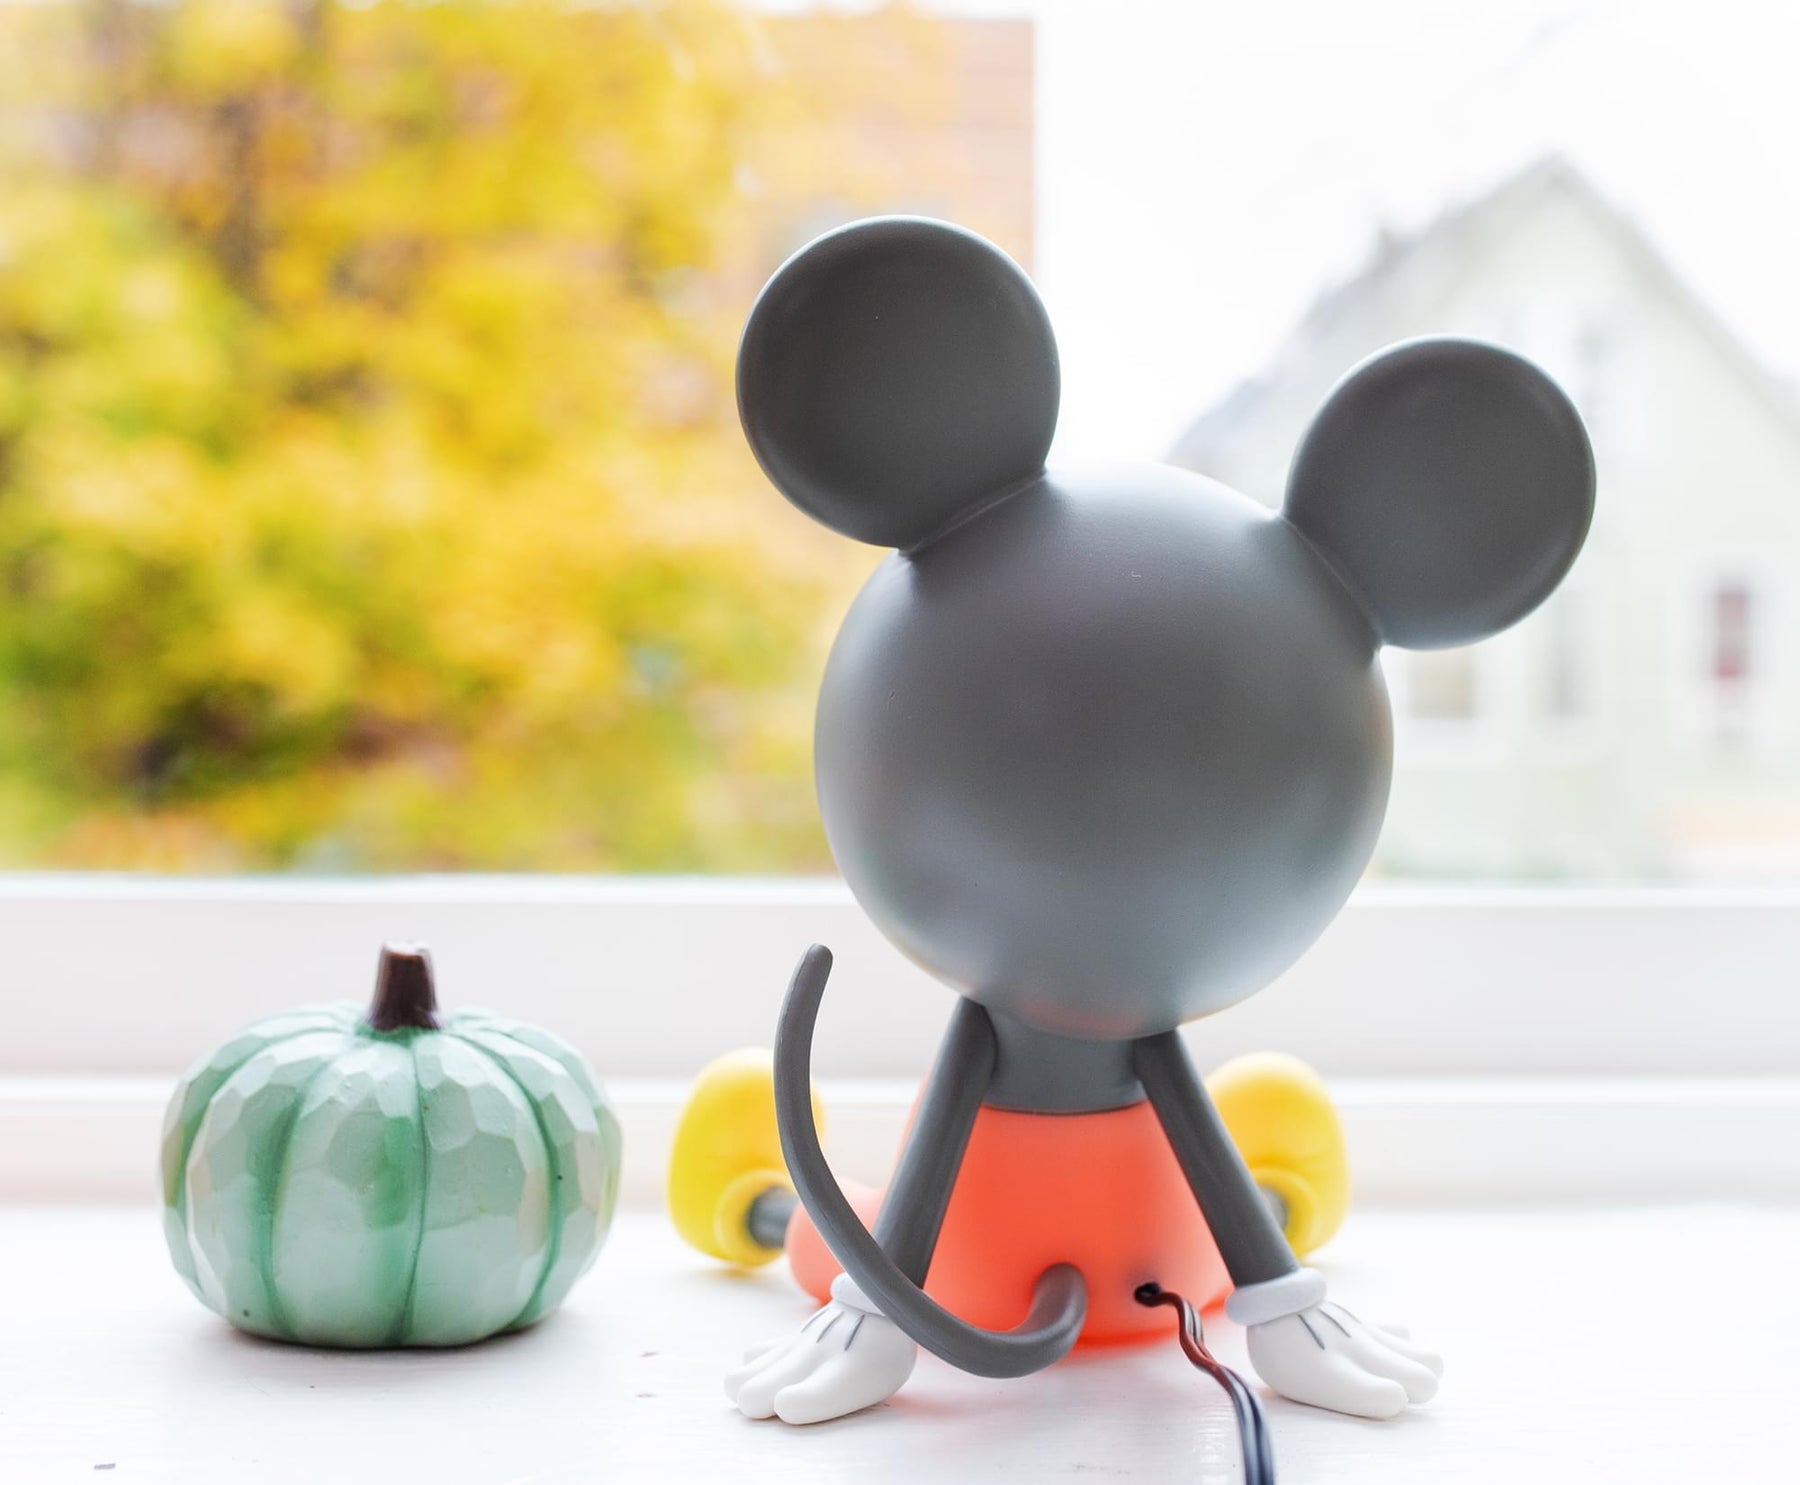 Disney Mickey Mouse Figural LED Mood Light | 6 Inches Tall